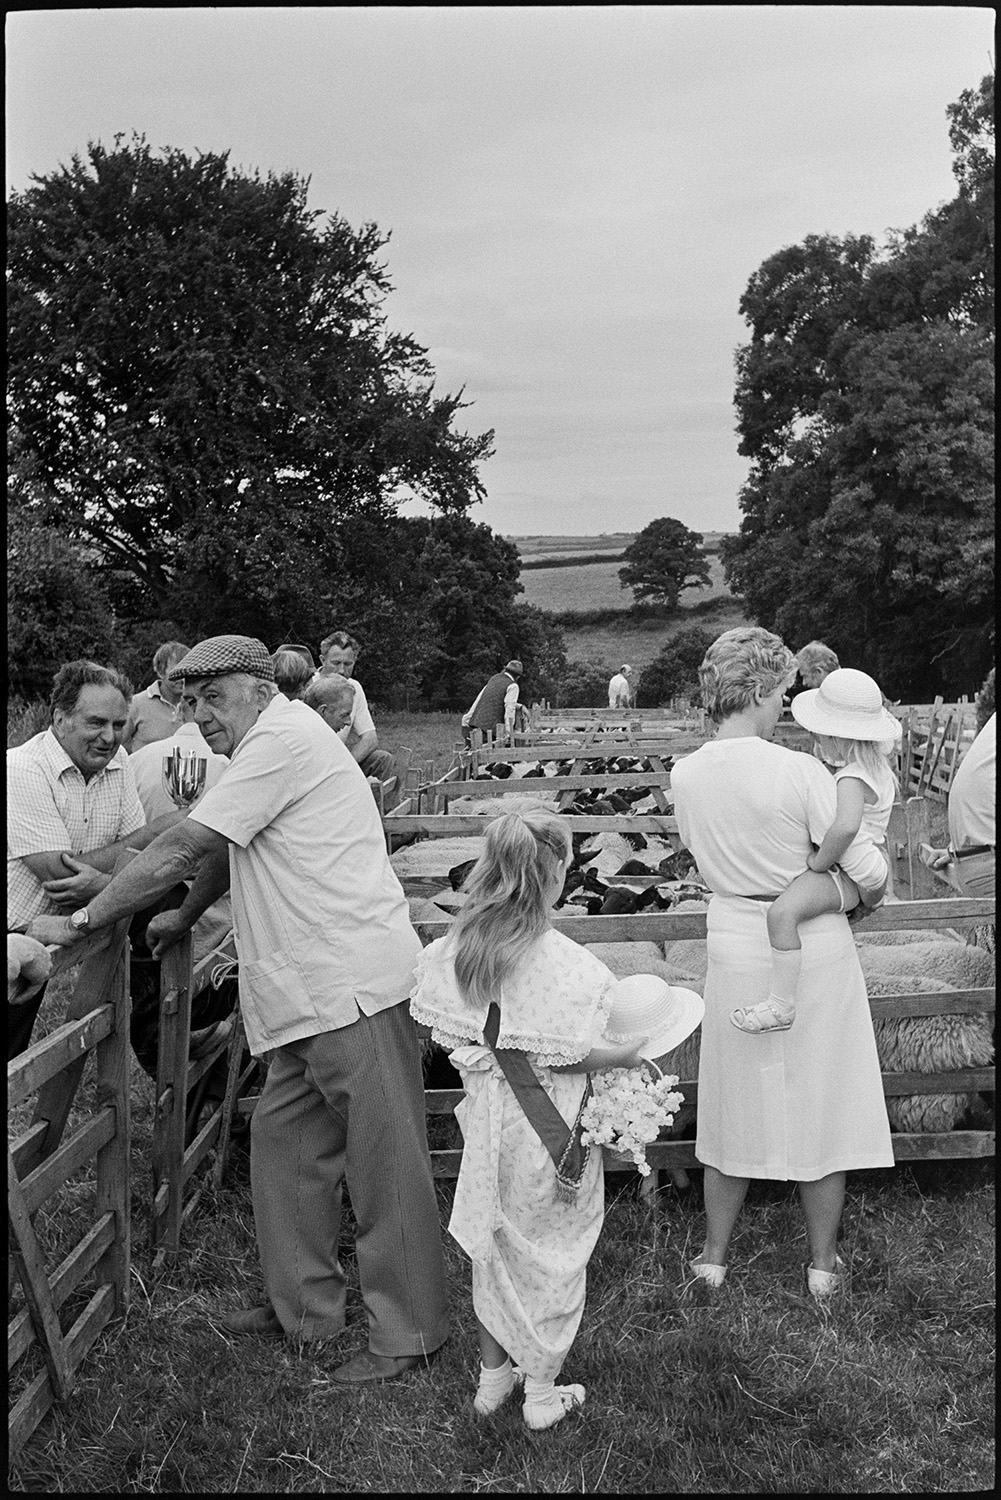 Fair, auction of sheep, farmers and crowds of spectators.
[A woman holding a child and a young girl wearing the dress of an attendant of the Chulmleigh Fair Queen, looking at sheep in wooden pens being sold at Chulmleigh Fair. A number of men are also gathered around the pens looking at the sheep.]